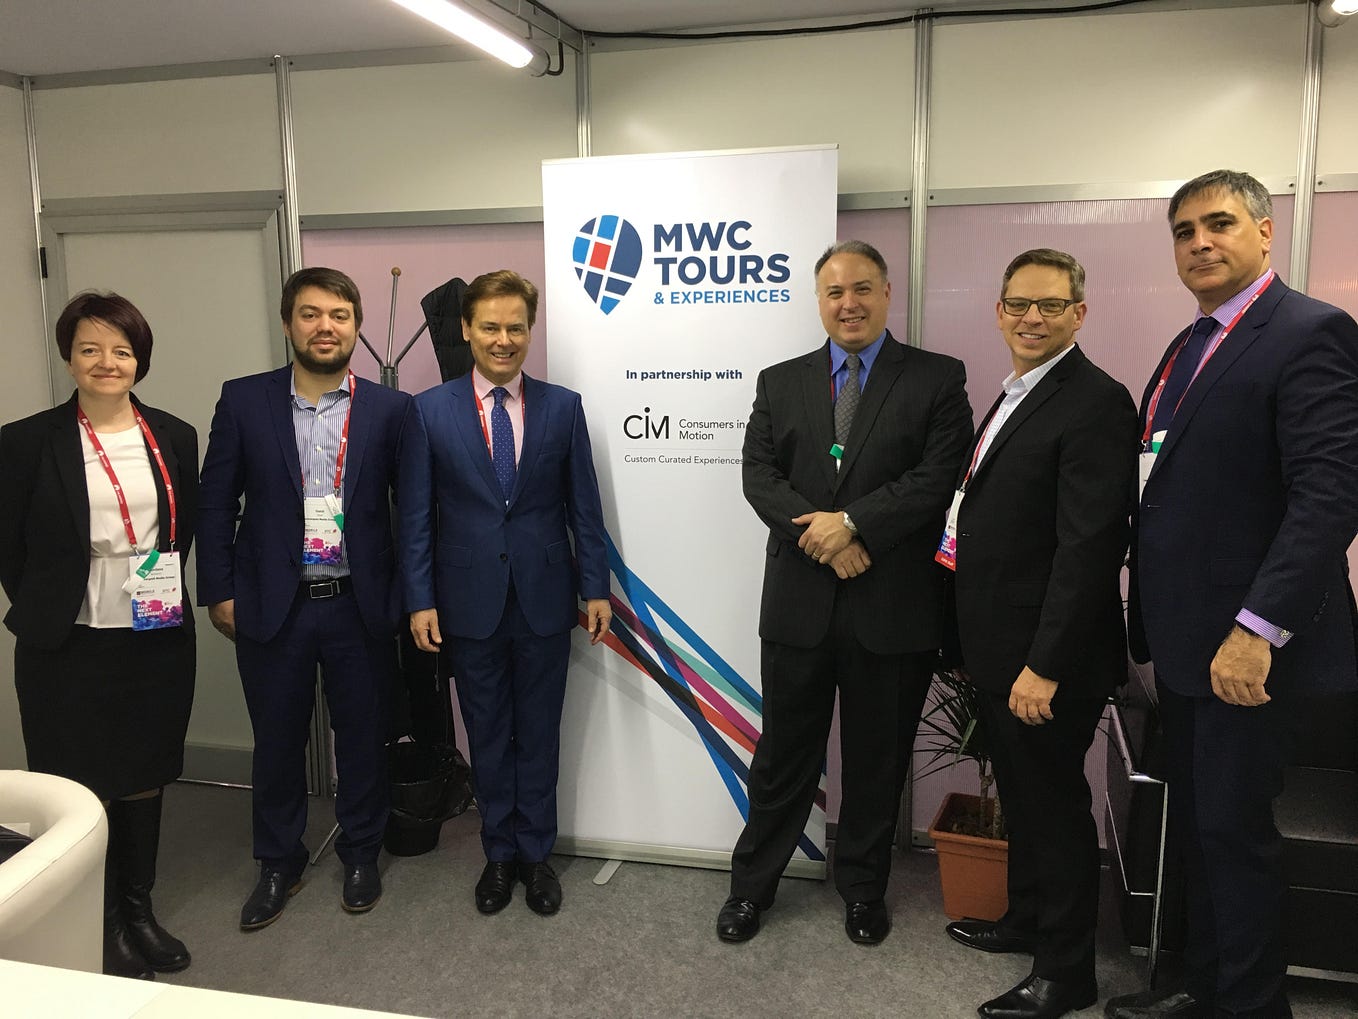 Mobile World Congress - Custom Curated Experiences Helps CEOs Navigate MWC 2017